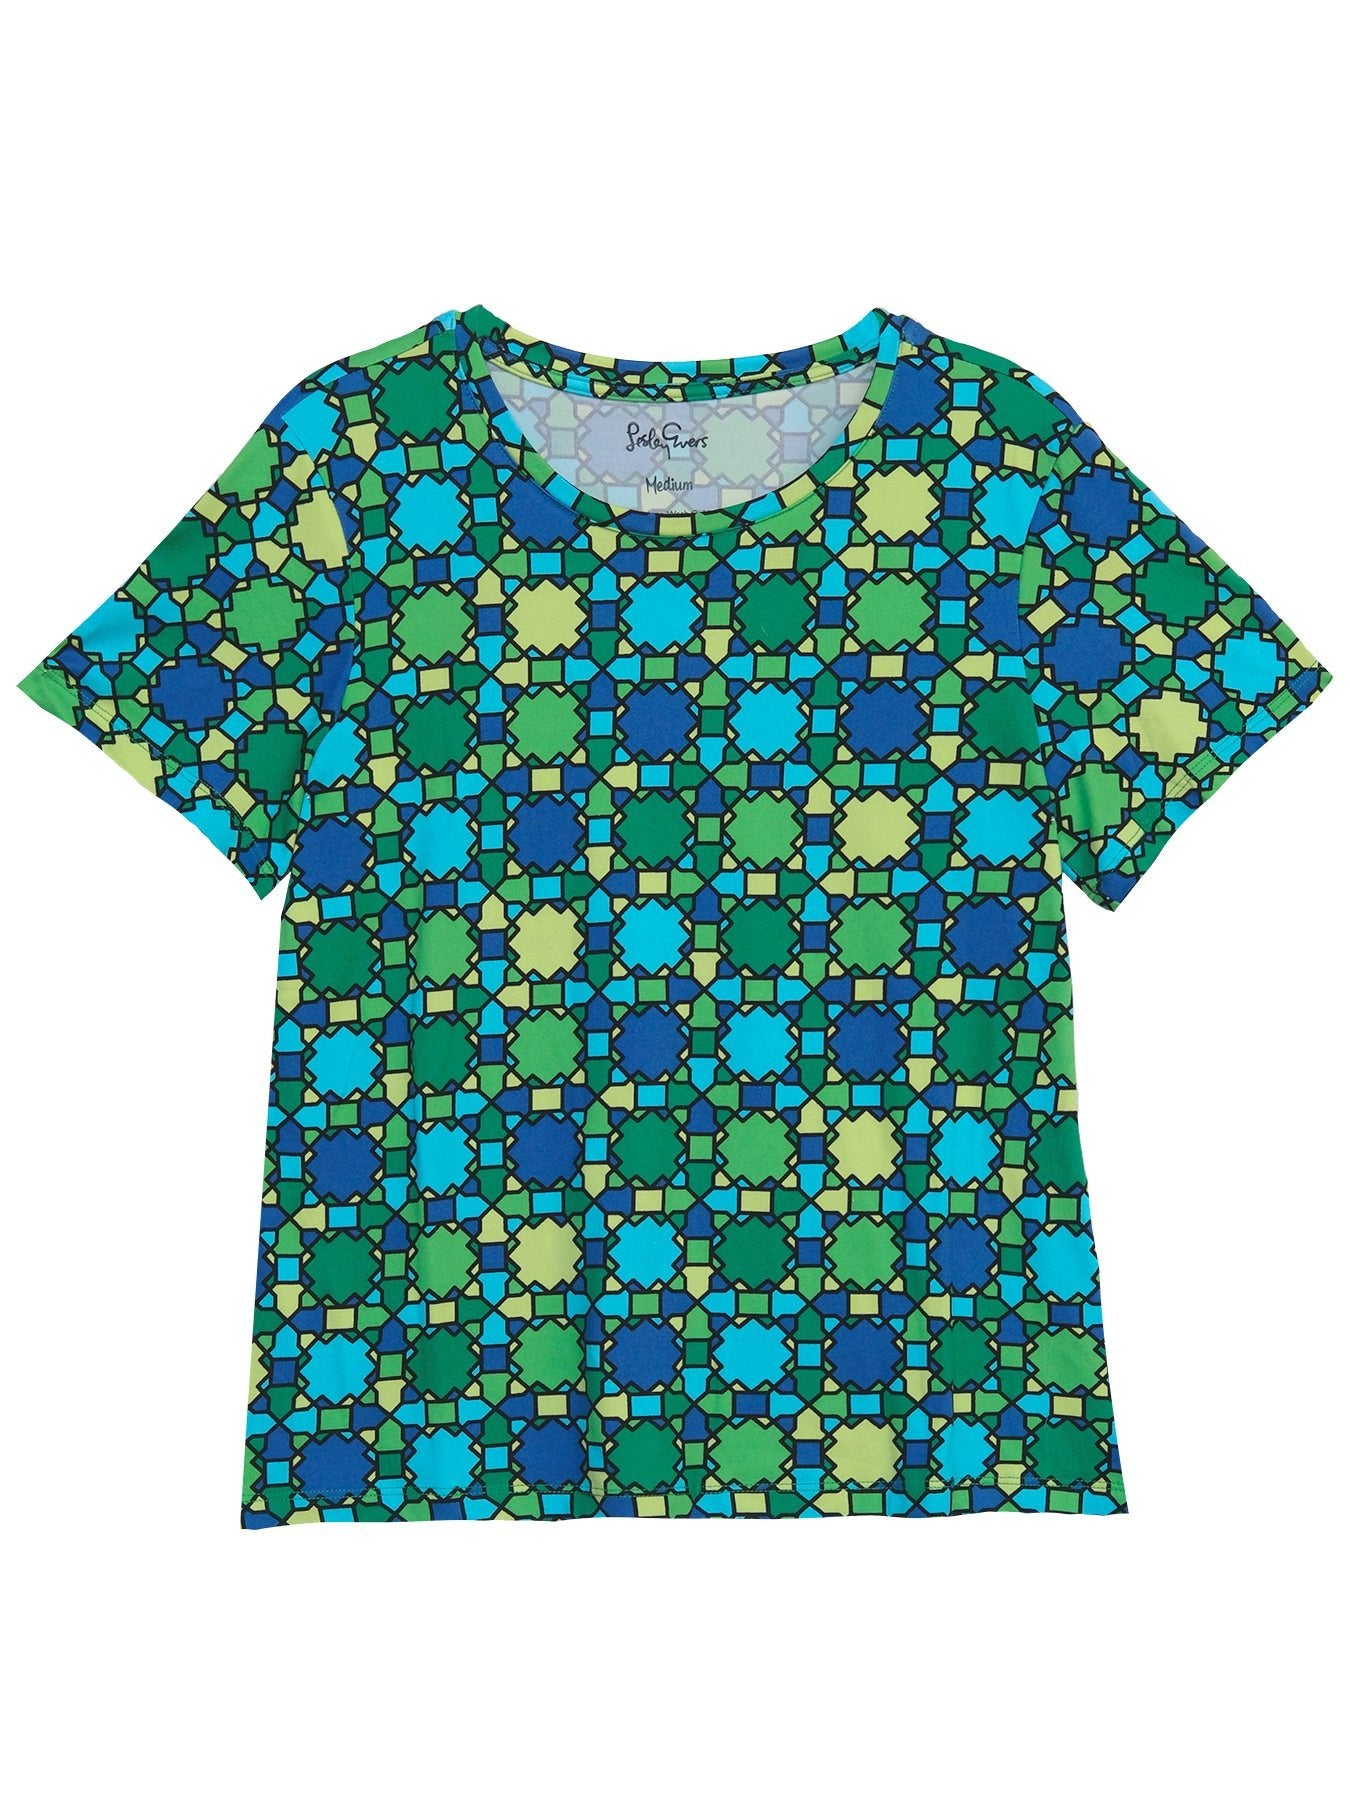 SUZI tee Stained Glass - Lesley Evers-Best Seller-Shop-Shop/All Products